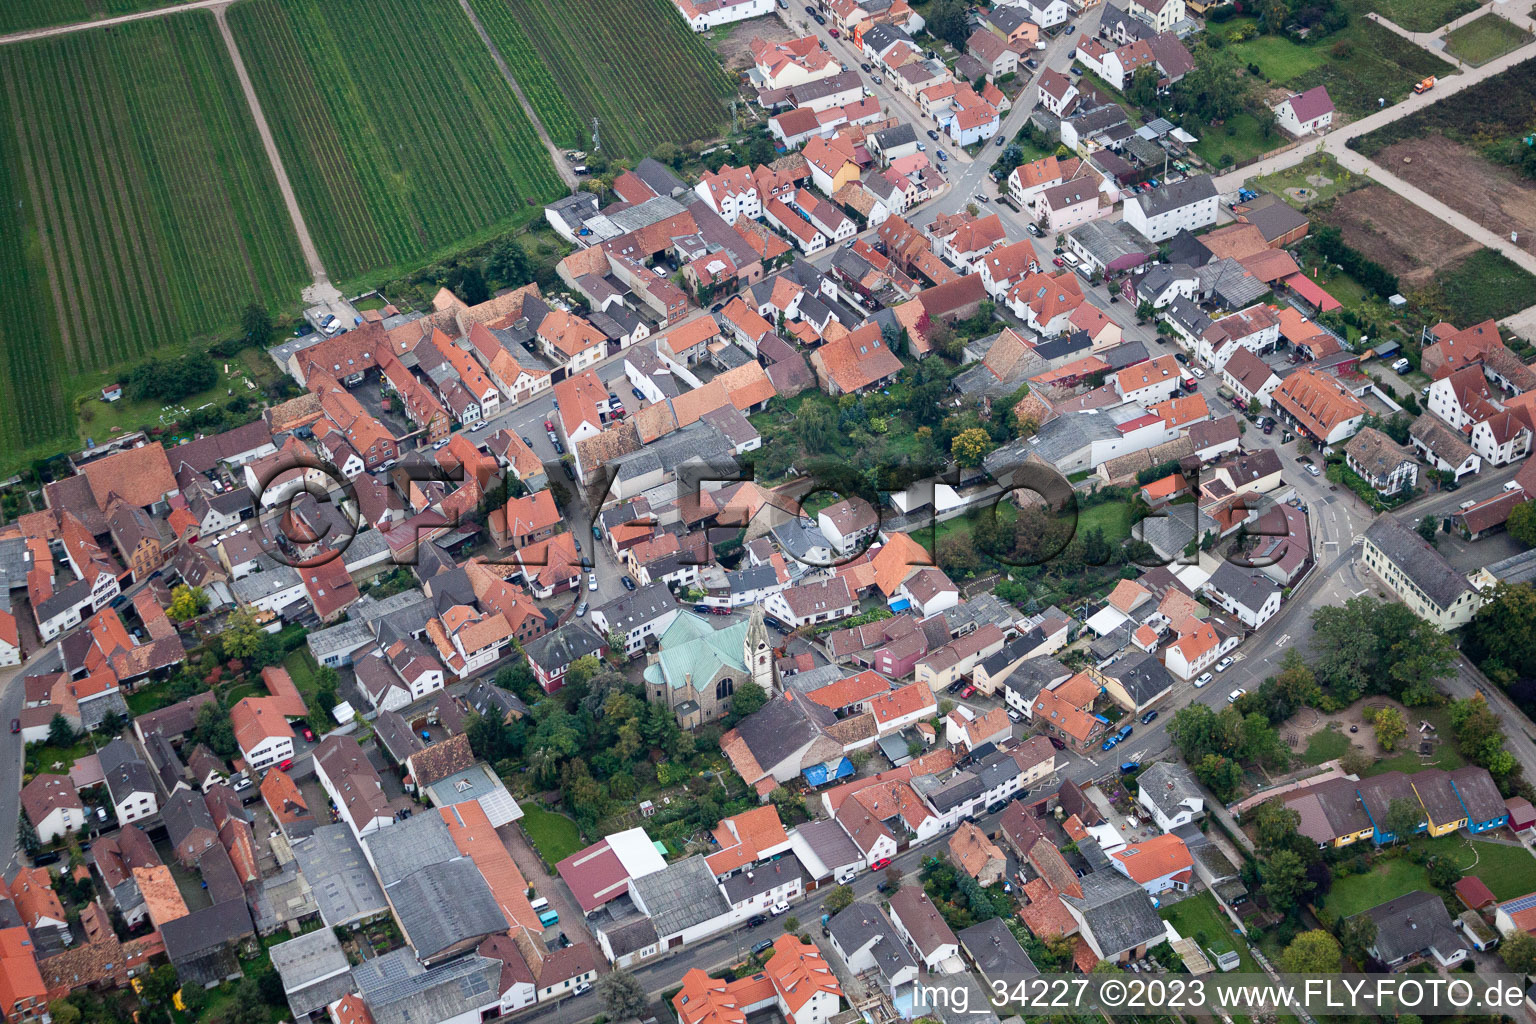 Ellerstadt in the state Rhineland-Palatinate, Germany viewn from the air